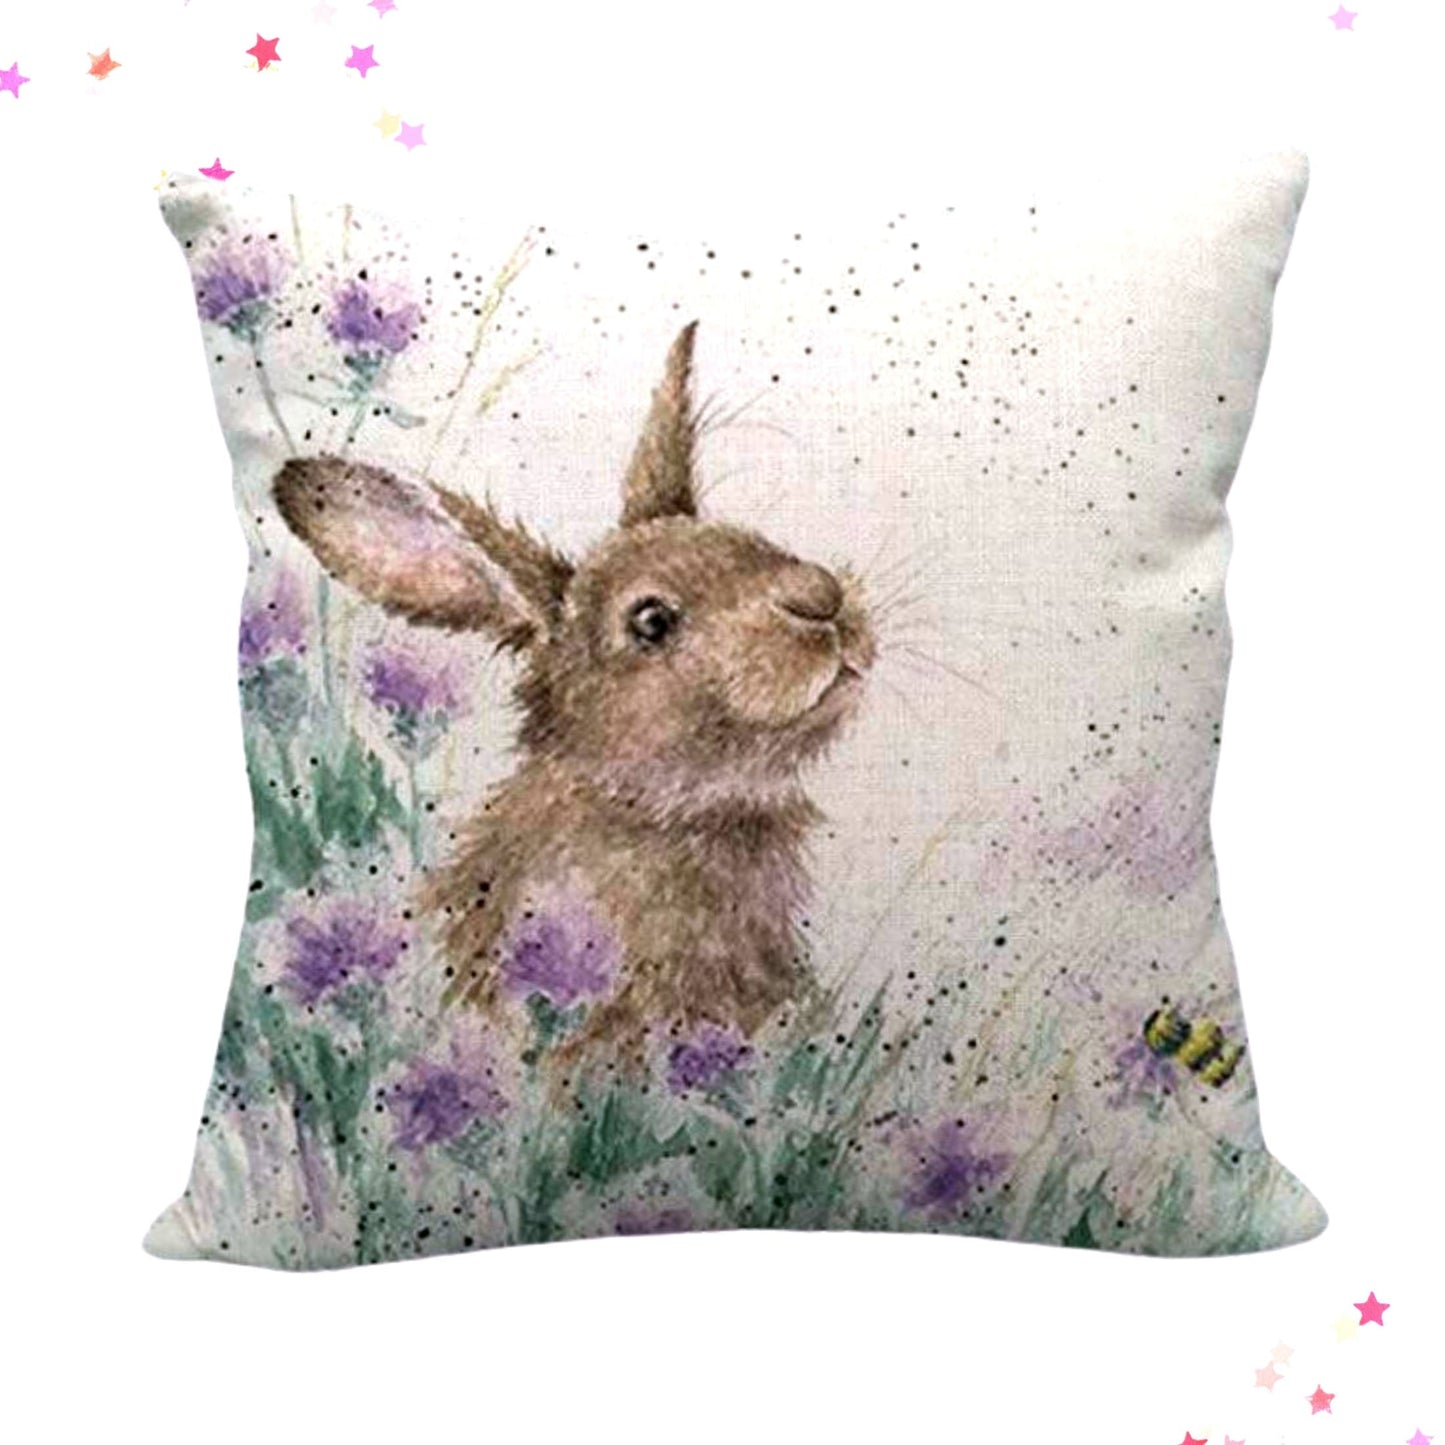 Rabbit in Lavender Fields Cushion Cover from Confetti Kitty, Only 10.00